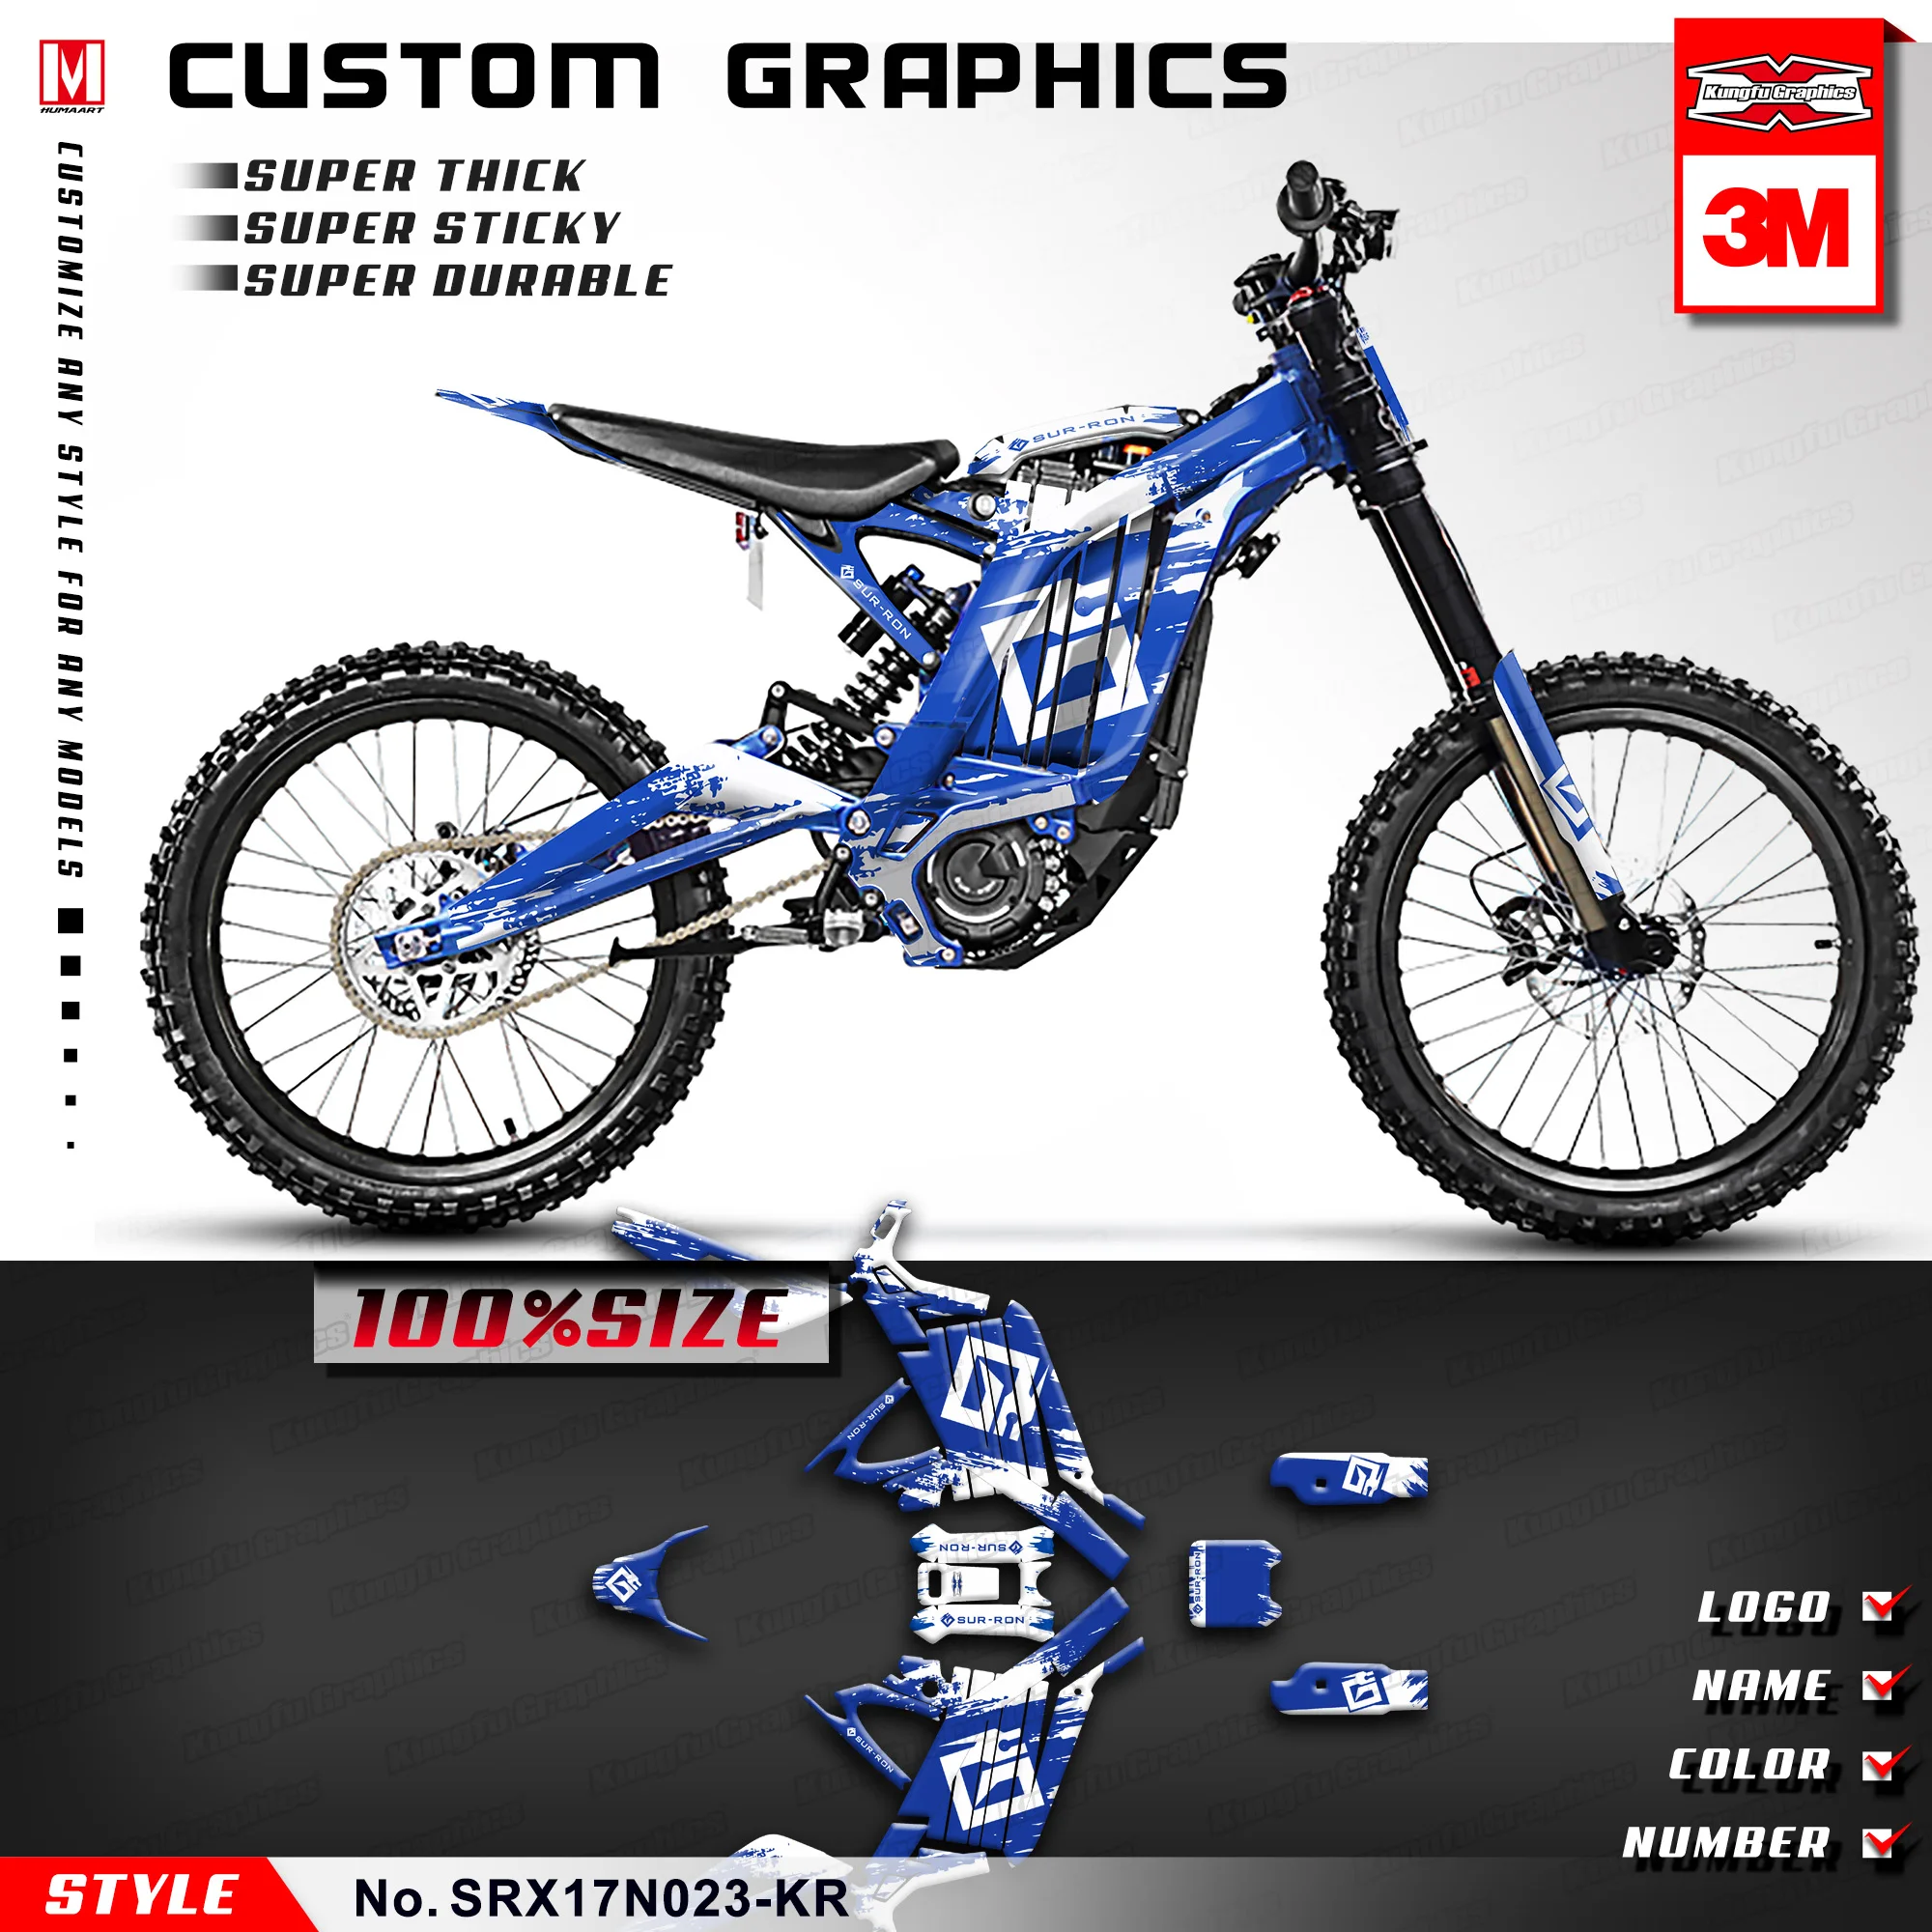 

KUNGFU GRAPHICS Motorcycle Décor Vinyl Wraps for Sur-Ron Light Bee X/S Segway X160 X260 Electric Bike, Customizable